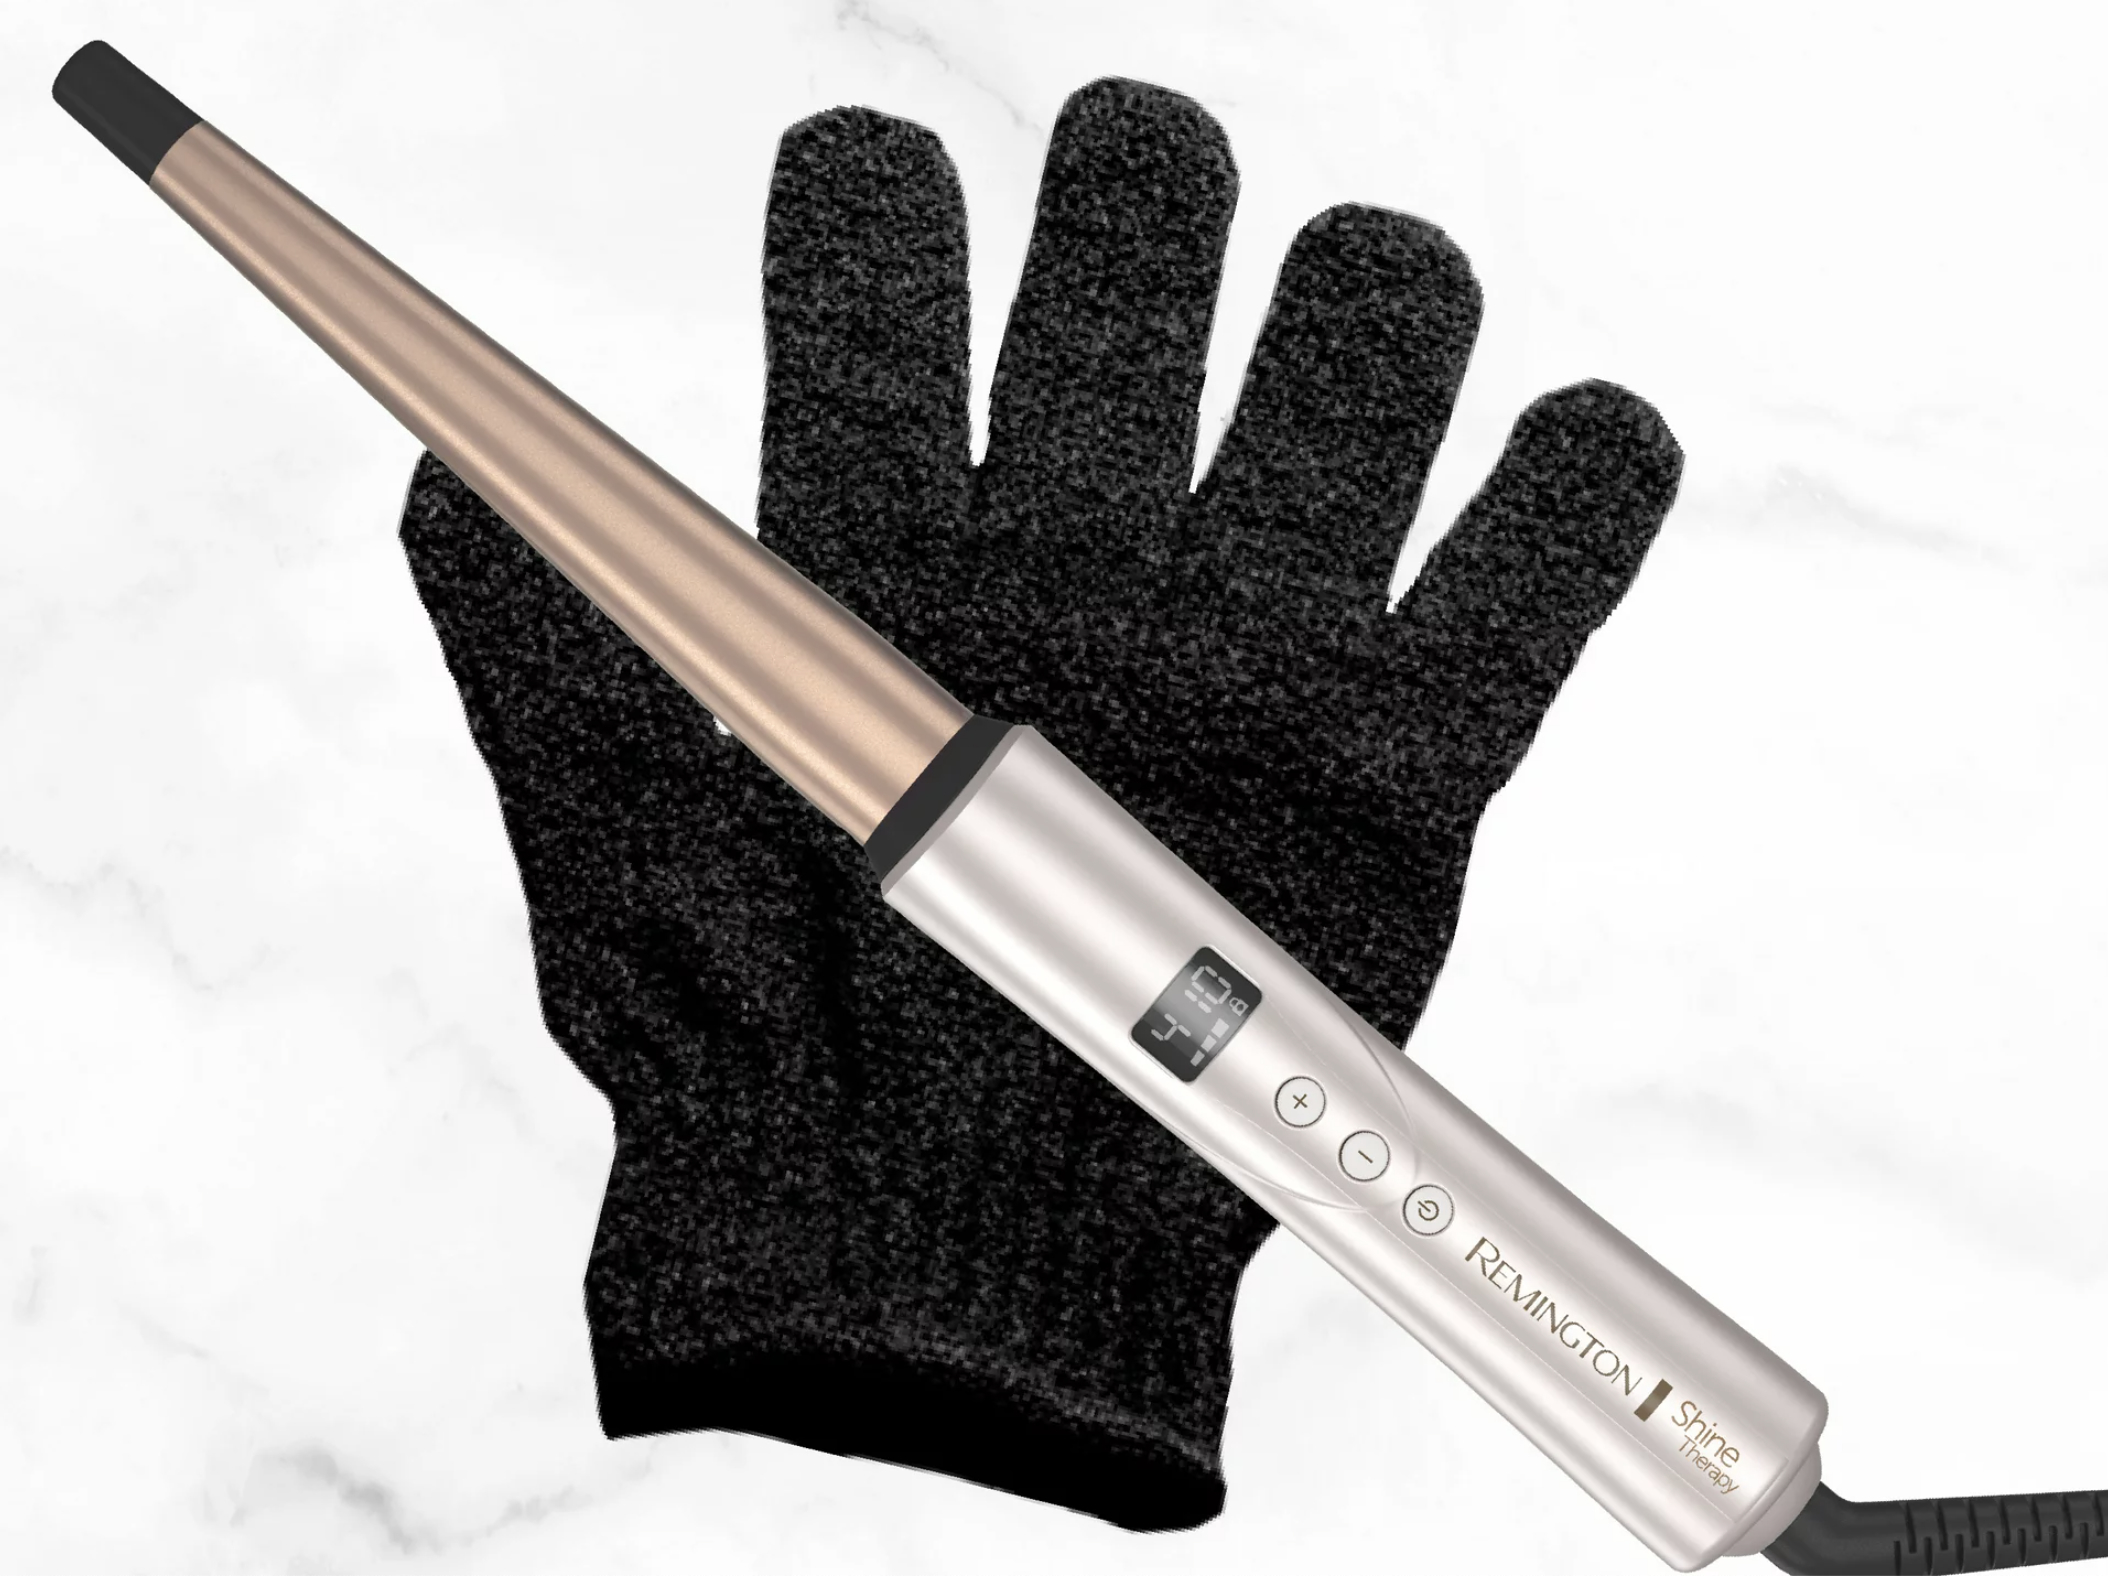 the curling wand in front of a heatless glove